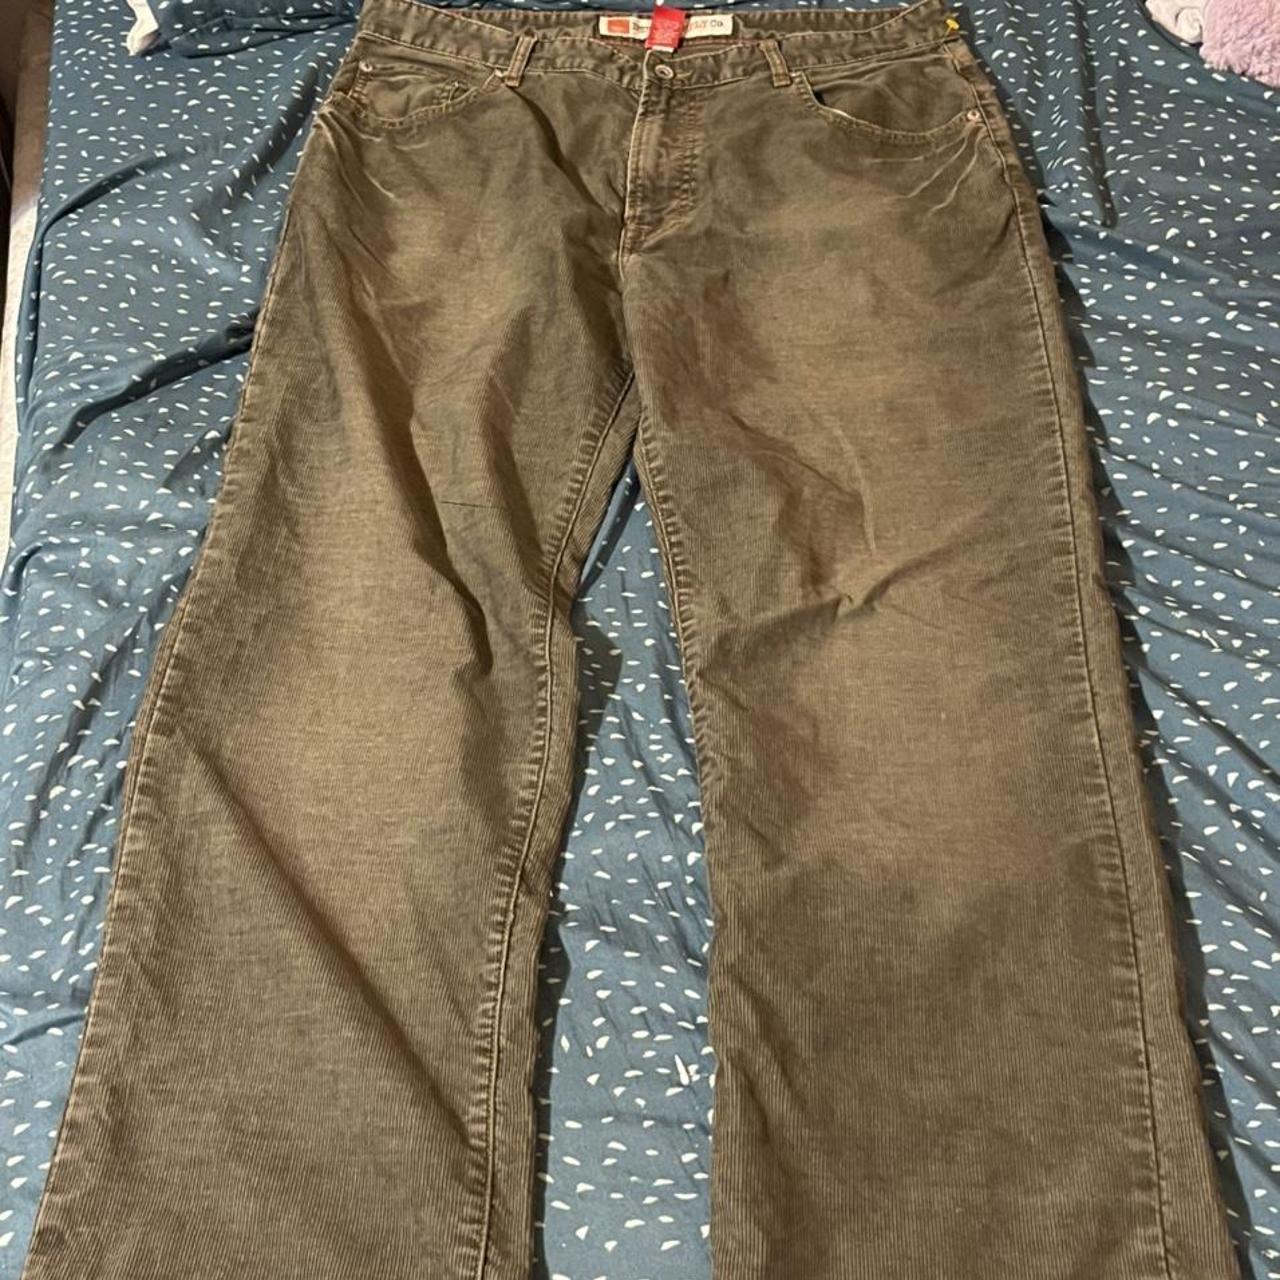 Mossimo Men's Green and Grey Jeans (3)